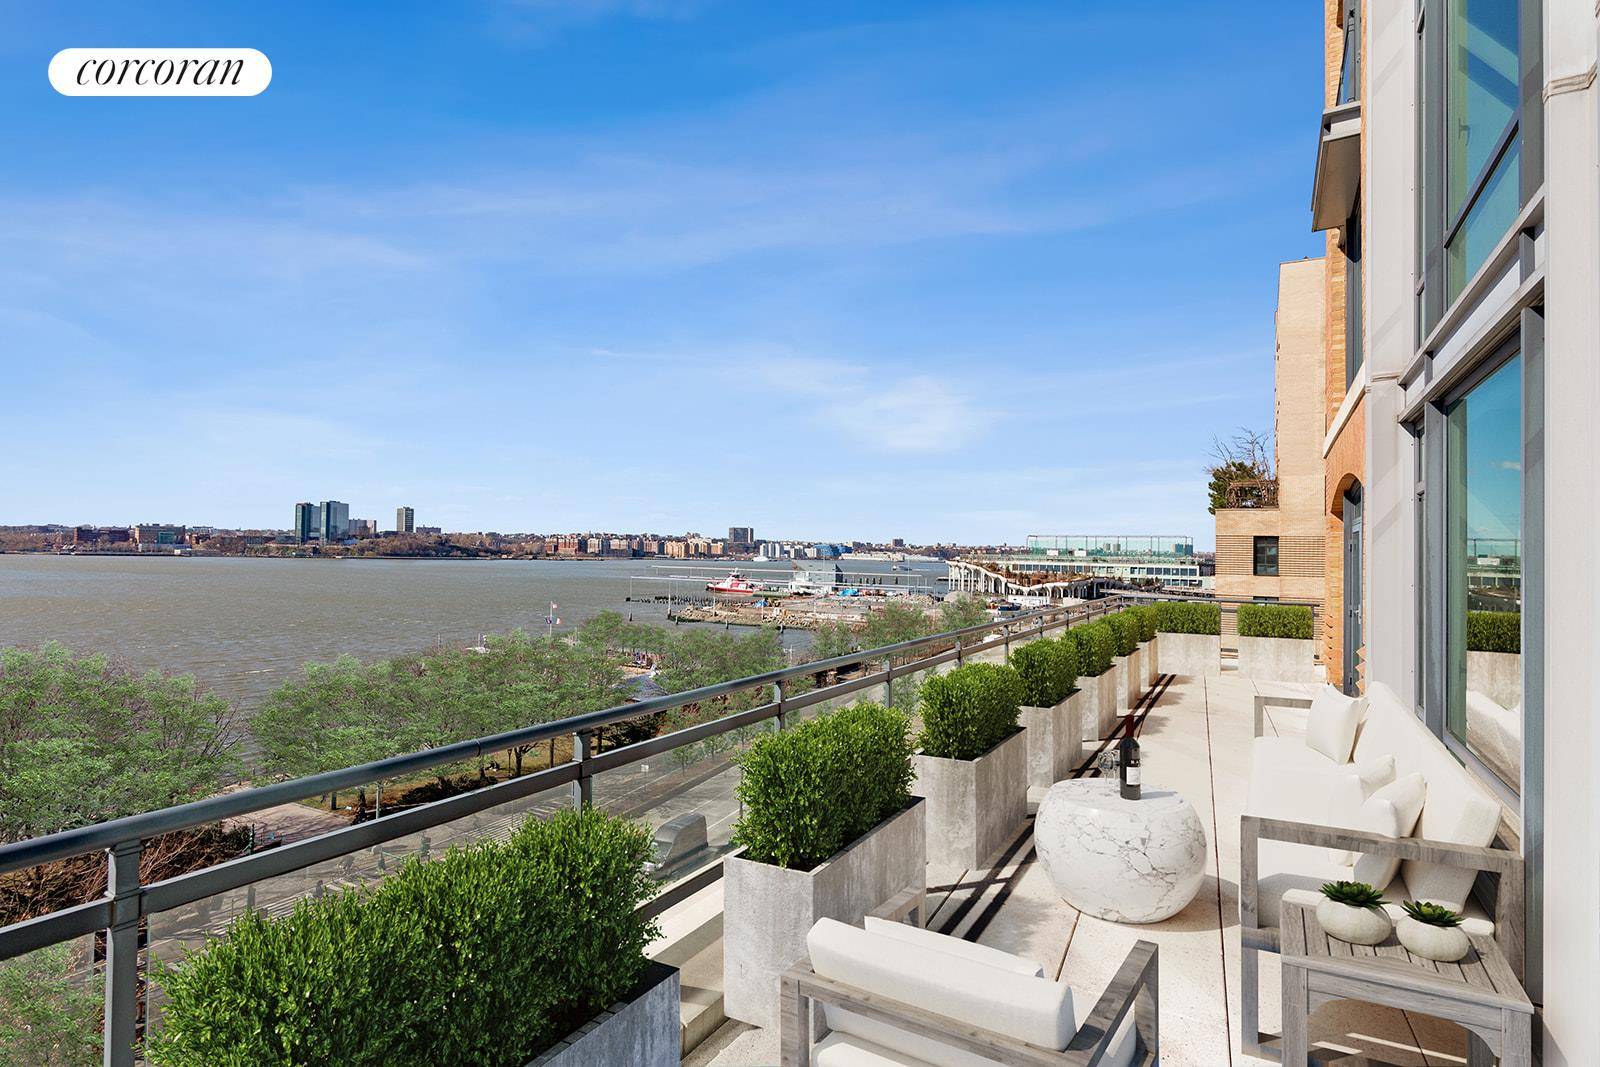 A rare opportunity to own a trophy West Village condo residence with private outdoor space and unobstructed views of the Hudson River.